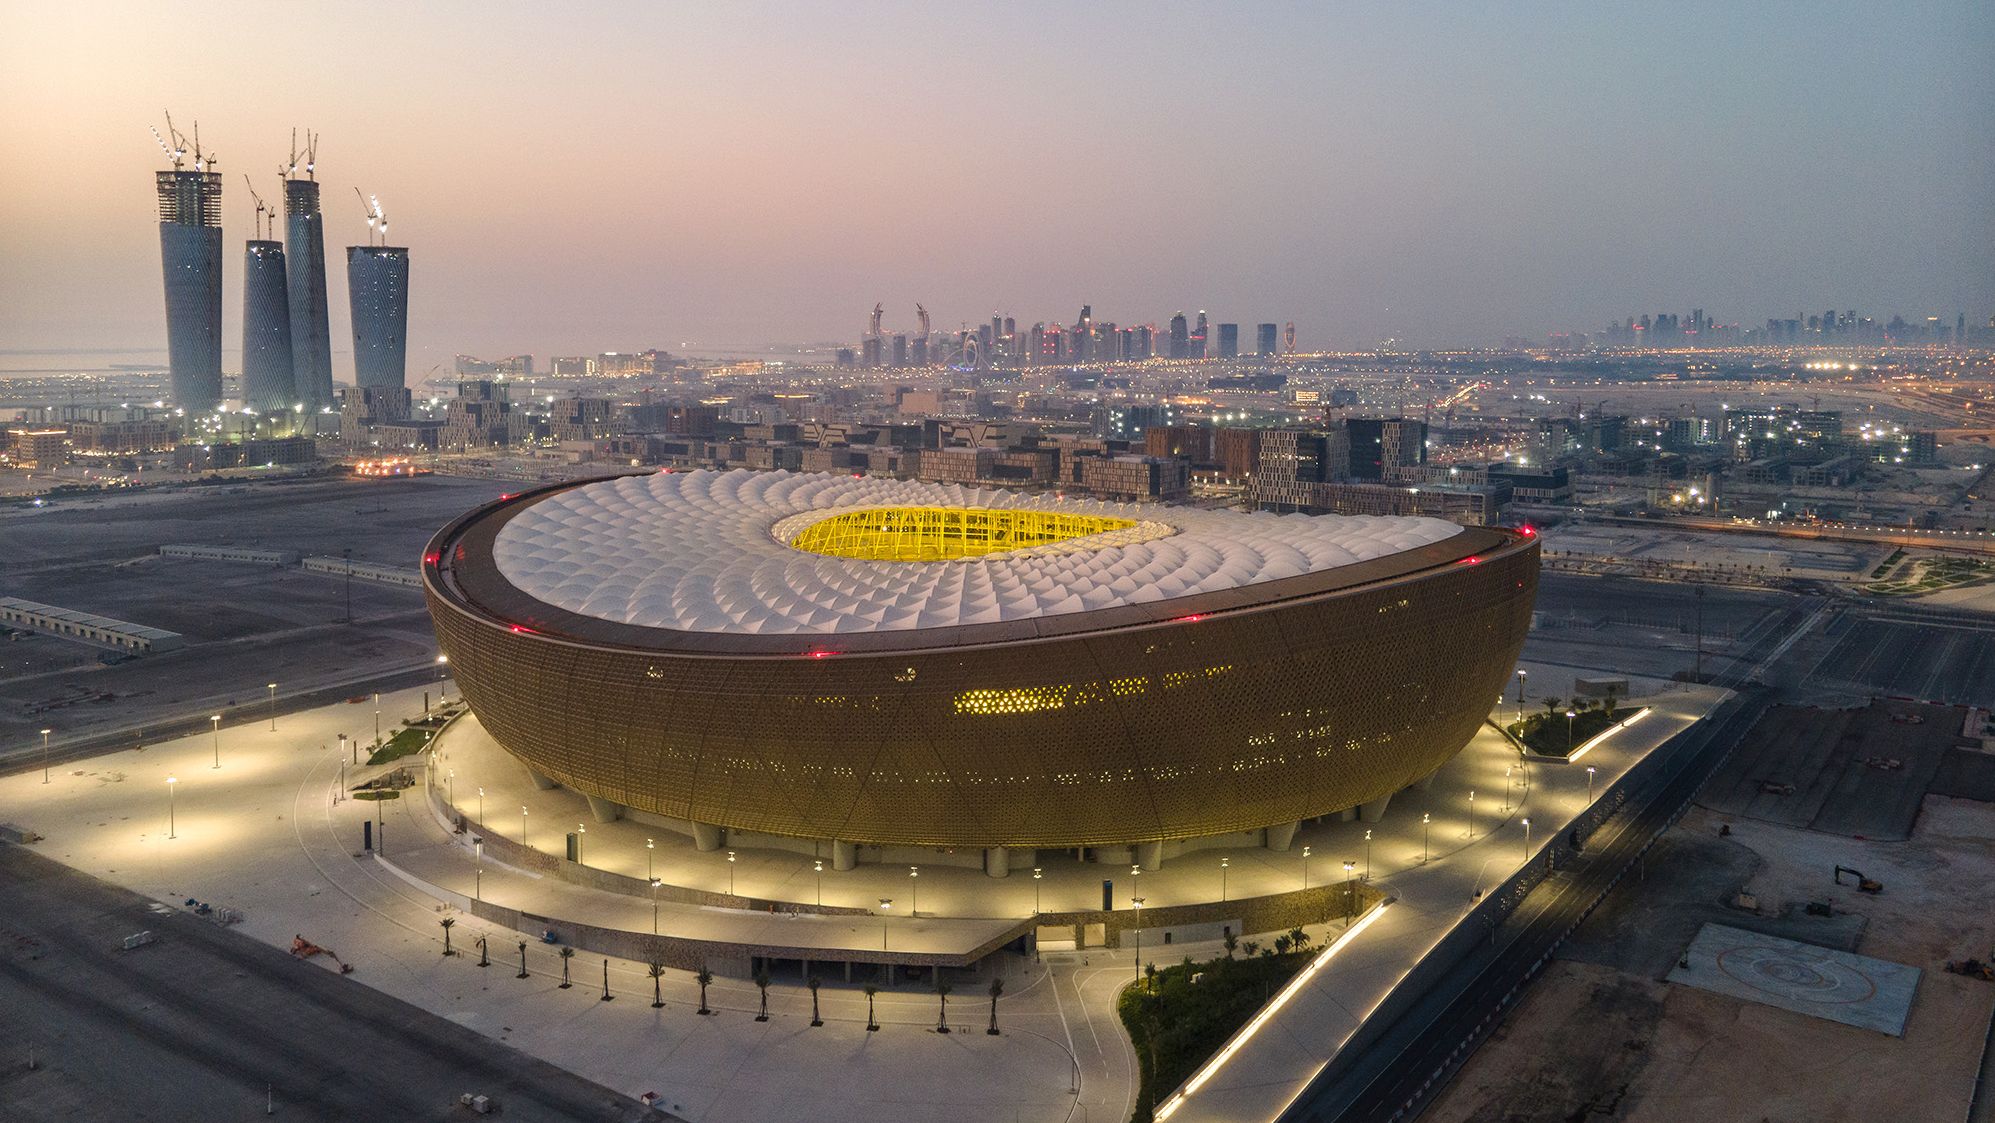 The Lusail Stadium in Doha, Qatar, will host the final of this year's World Cup which kicks off in November. 